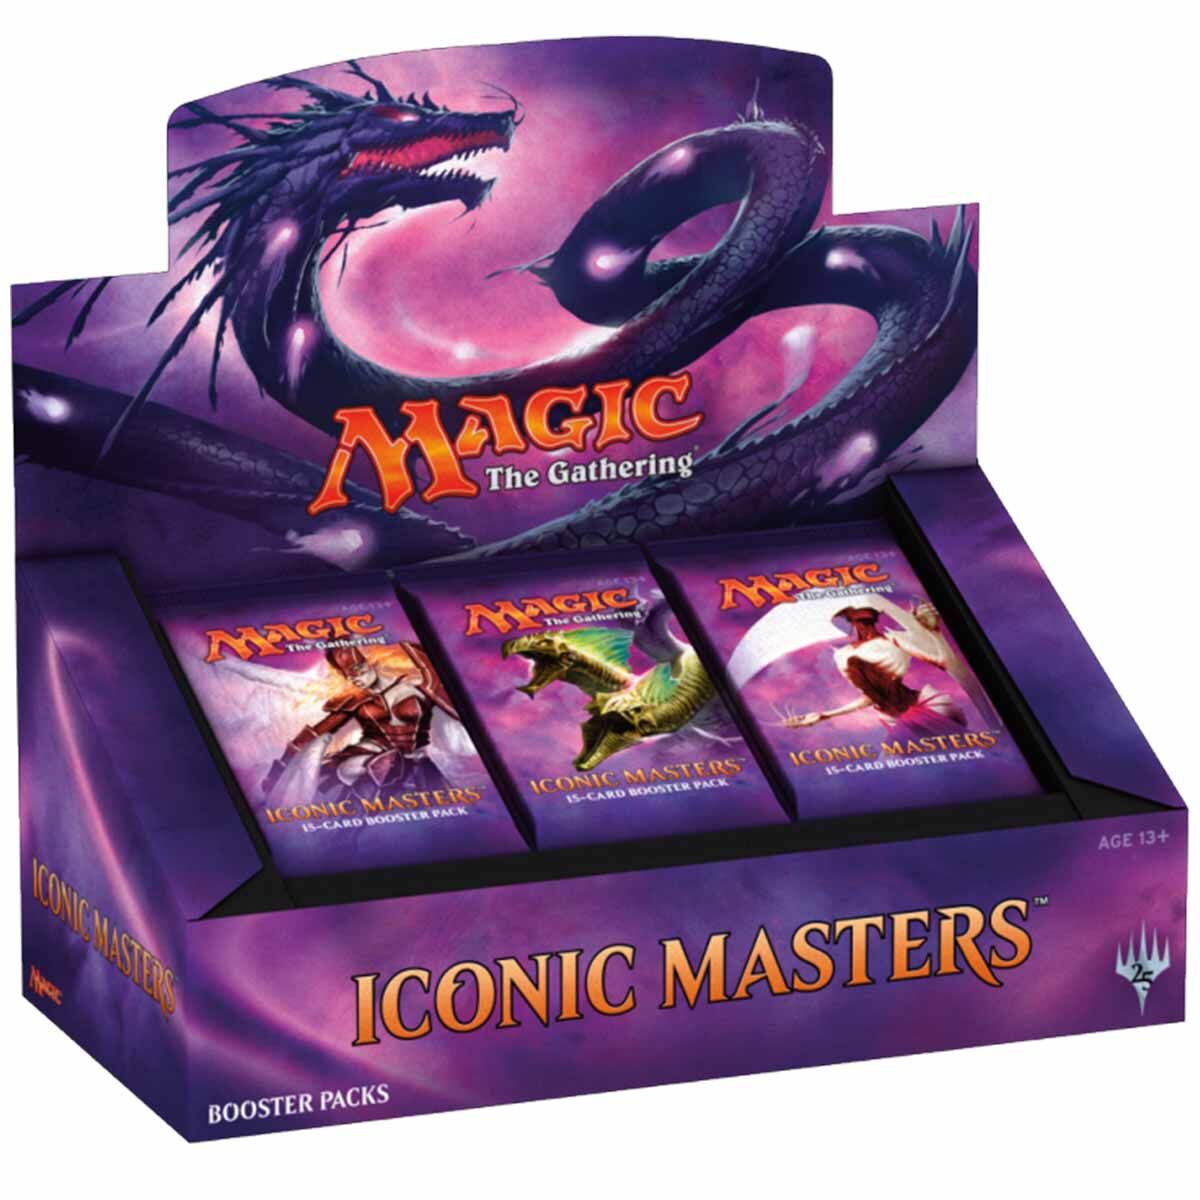 Iconic Masters Booster Box - Magic the Gathering